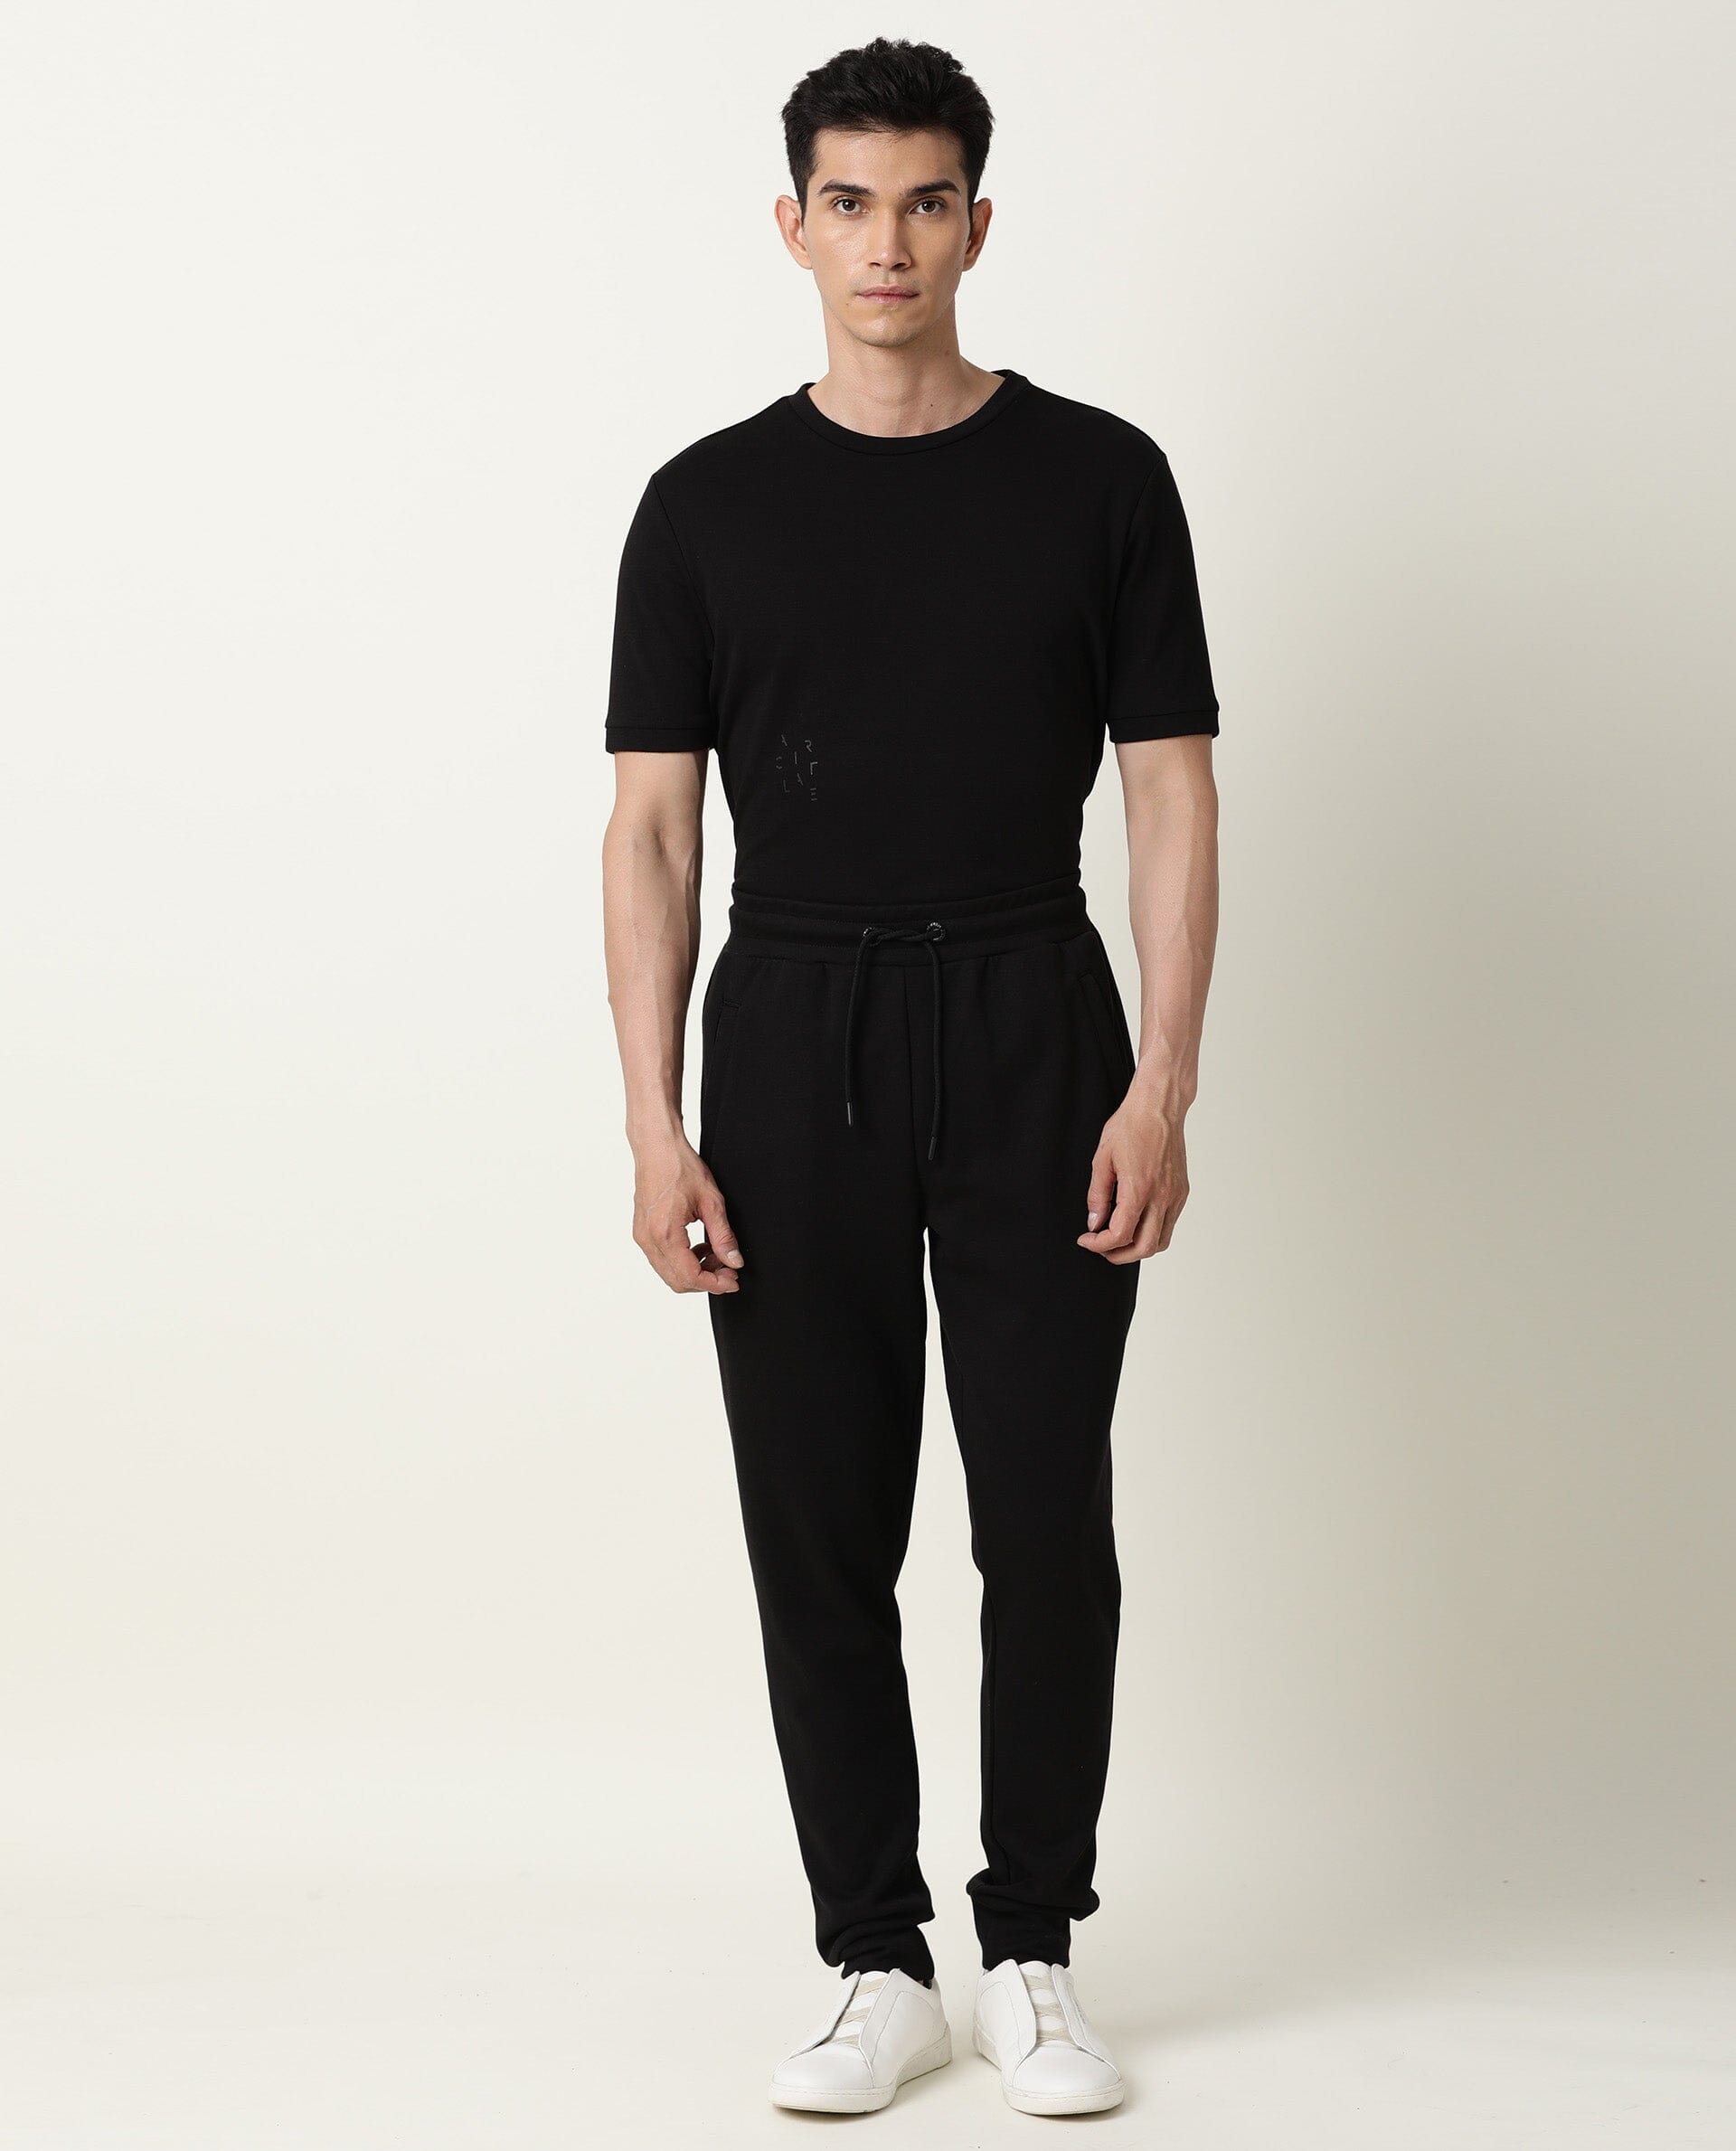 Black casual Track pants for Men – New North